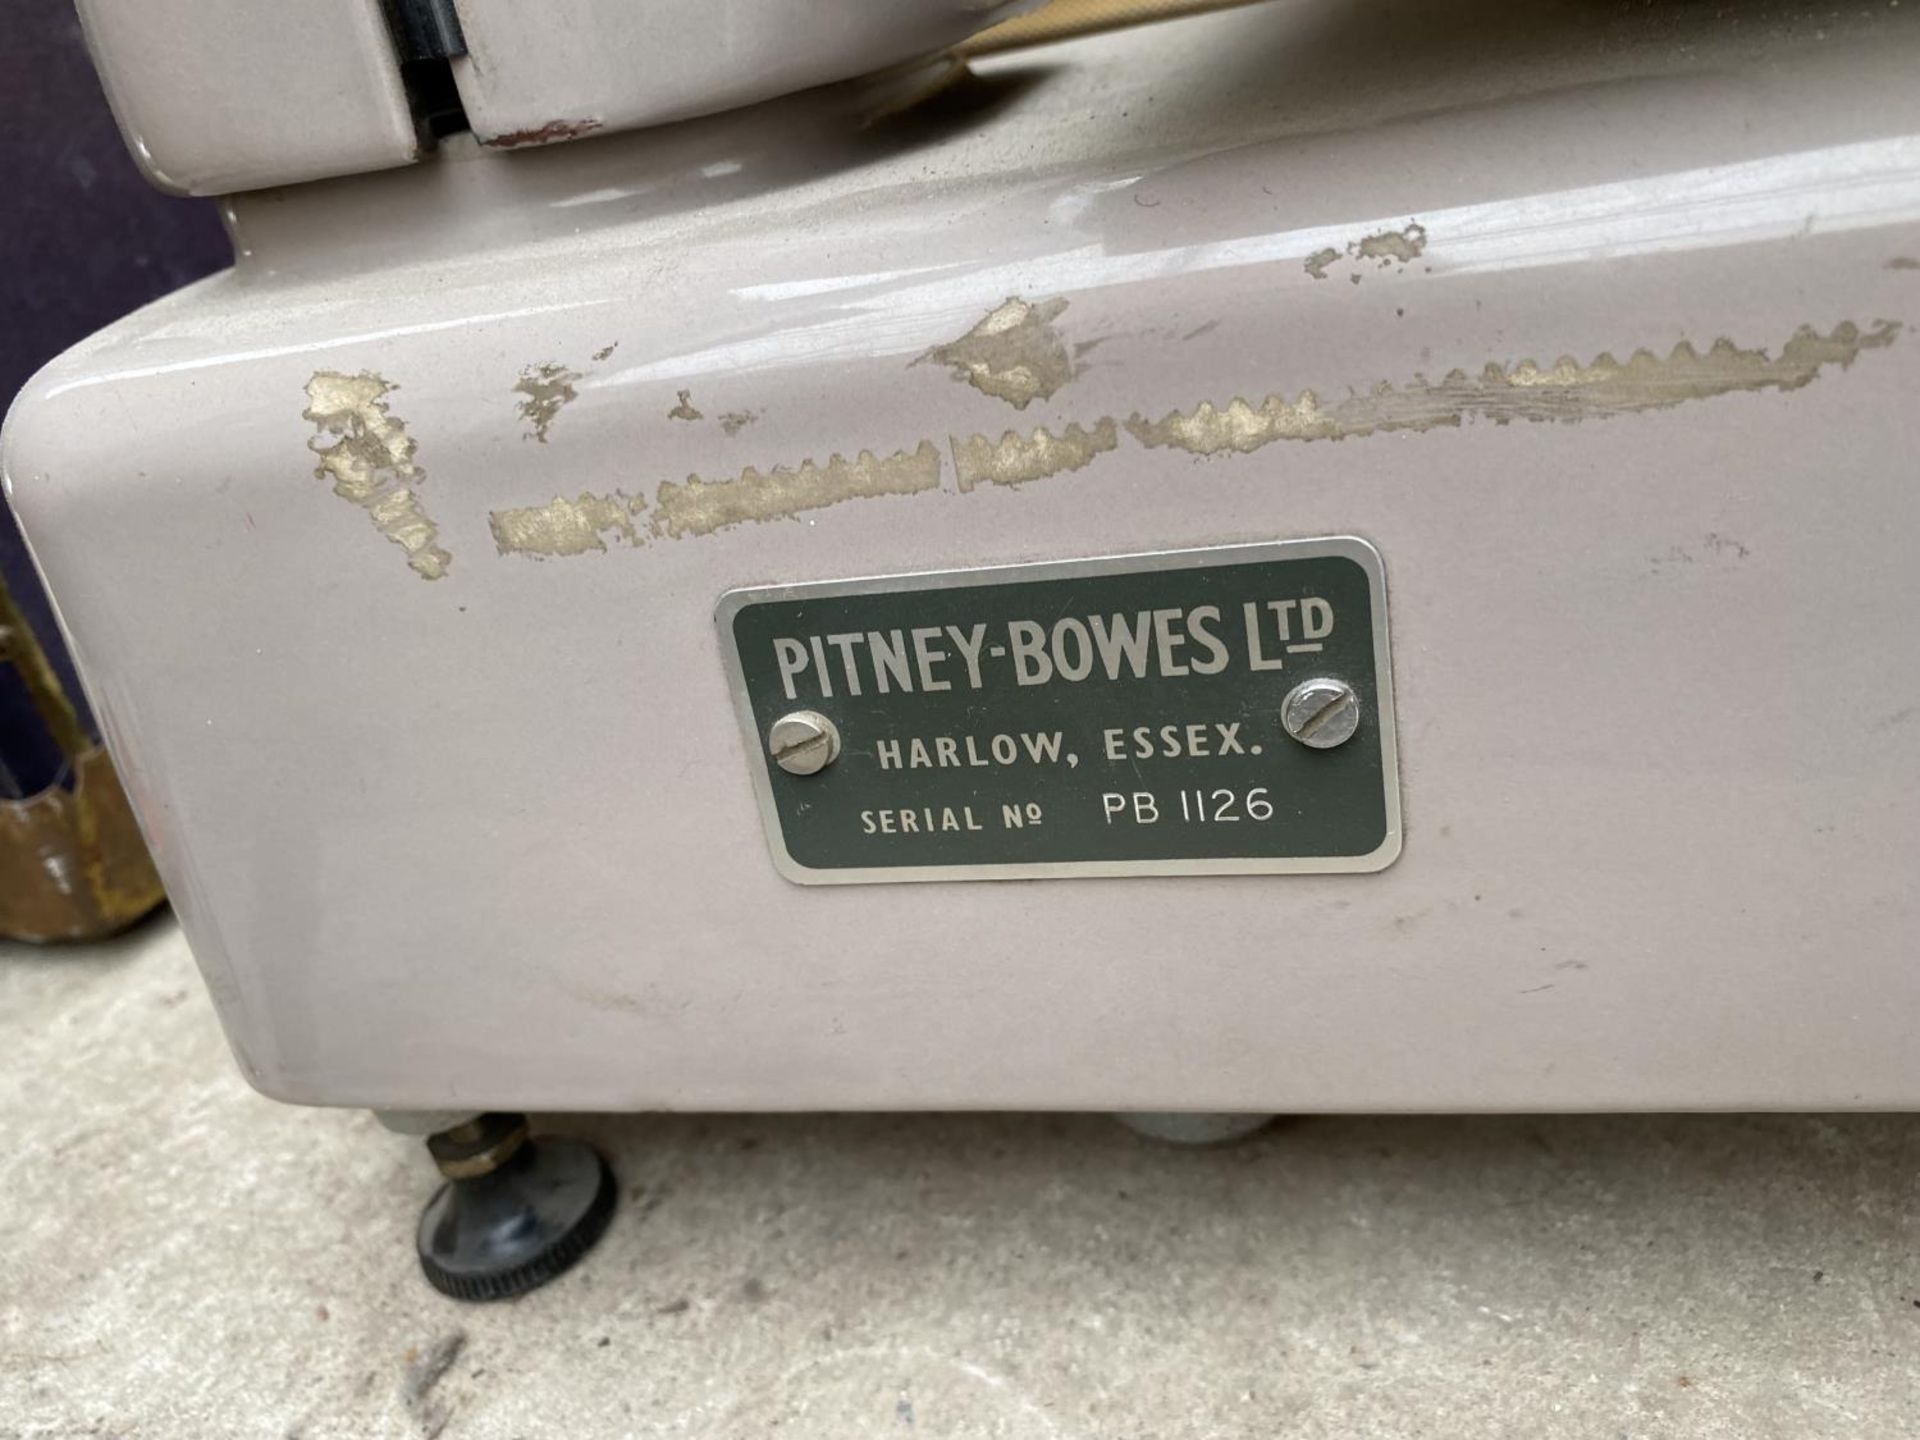 A SET OF VINTAGE AND RETRO PITNEY BOWES POST OFFICE SCALES - Image 4 of 4